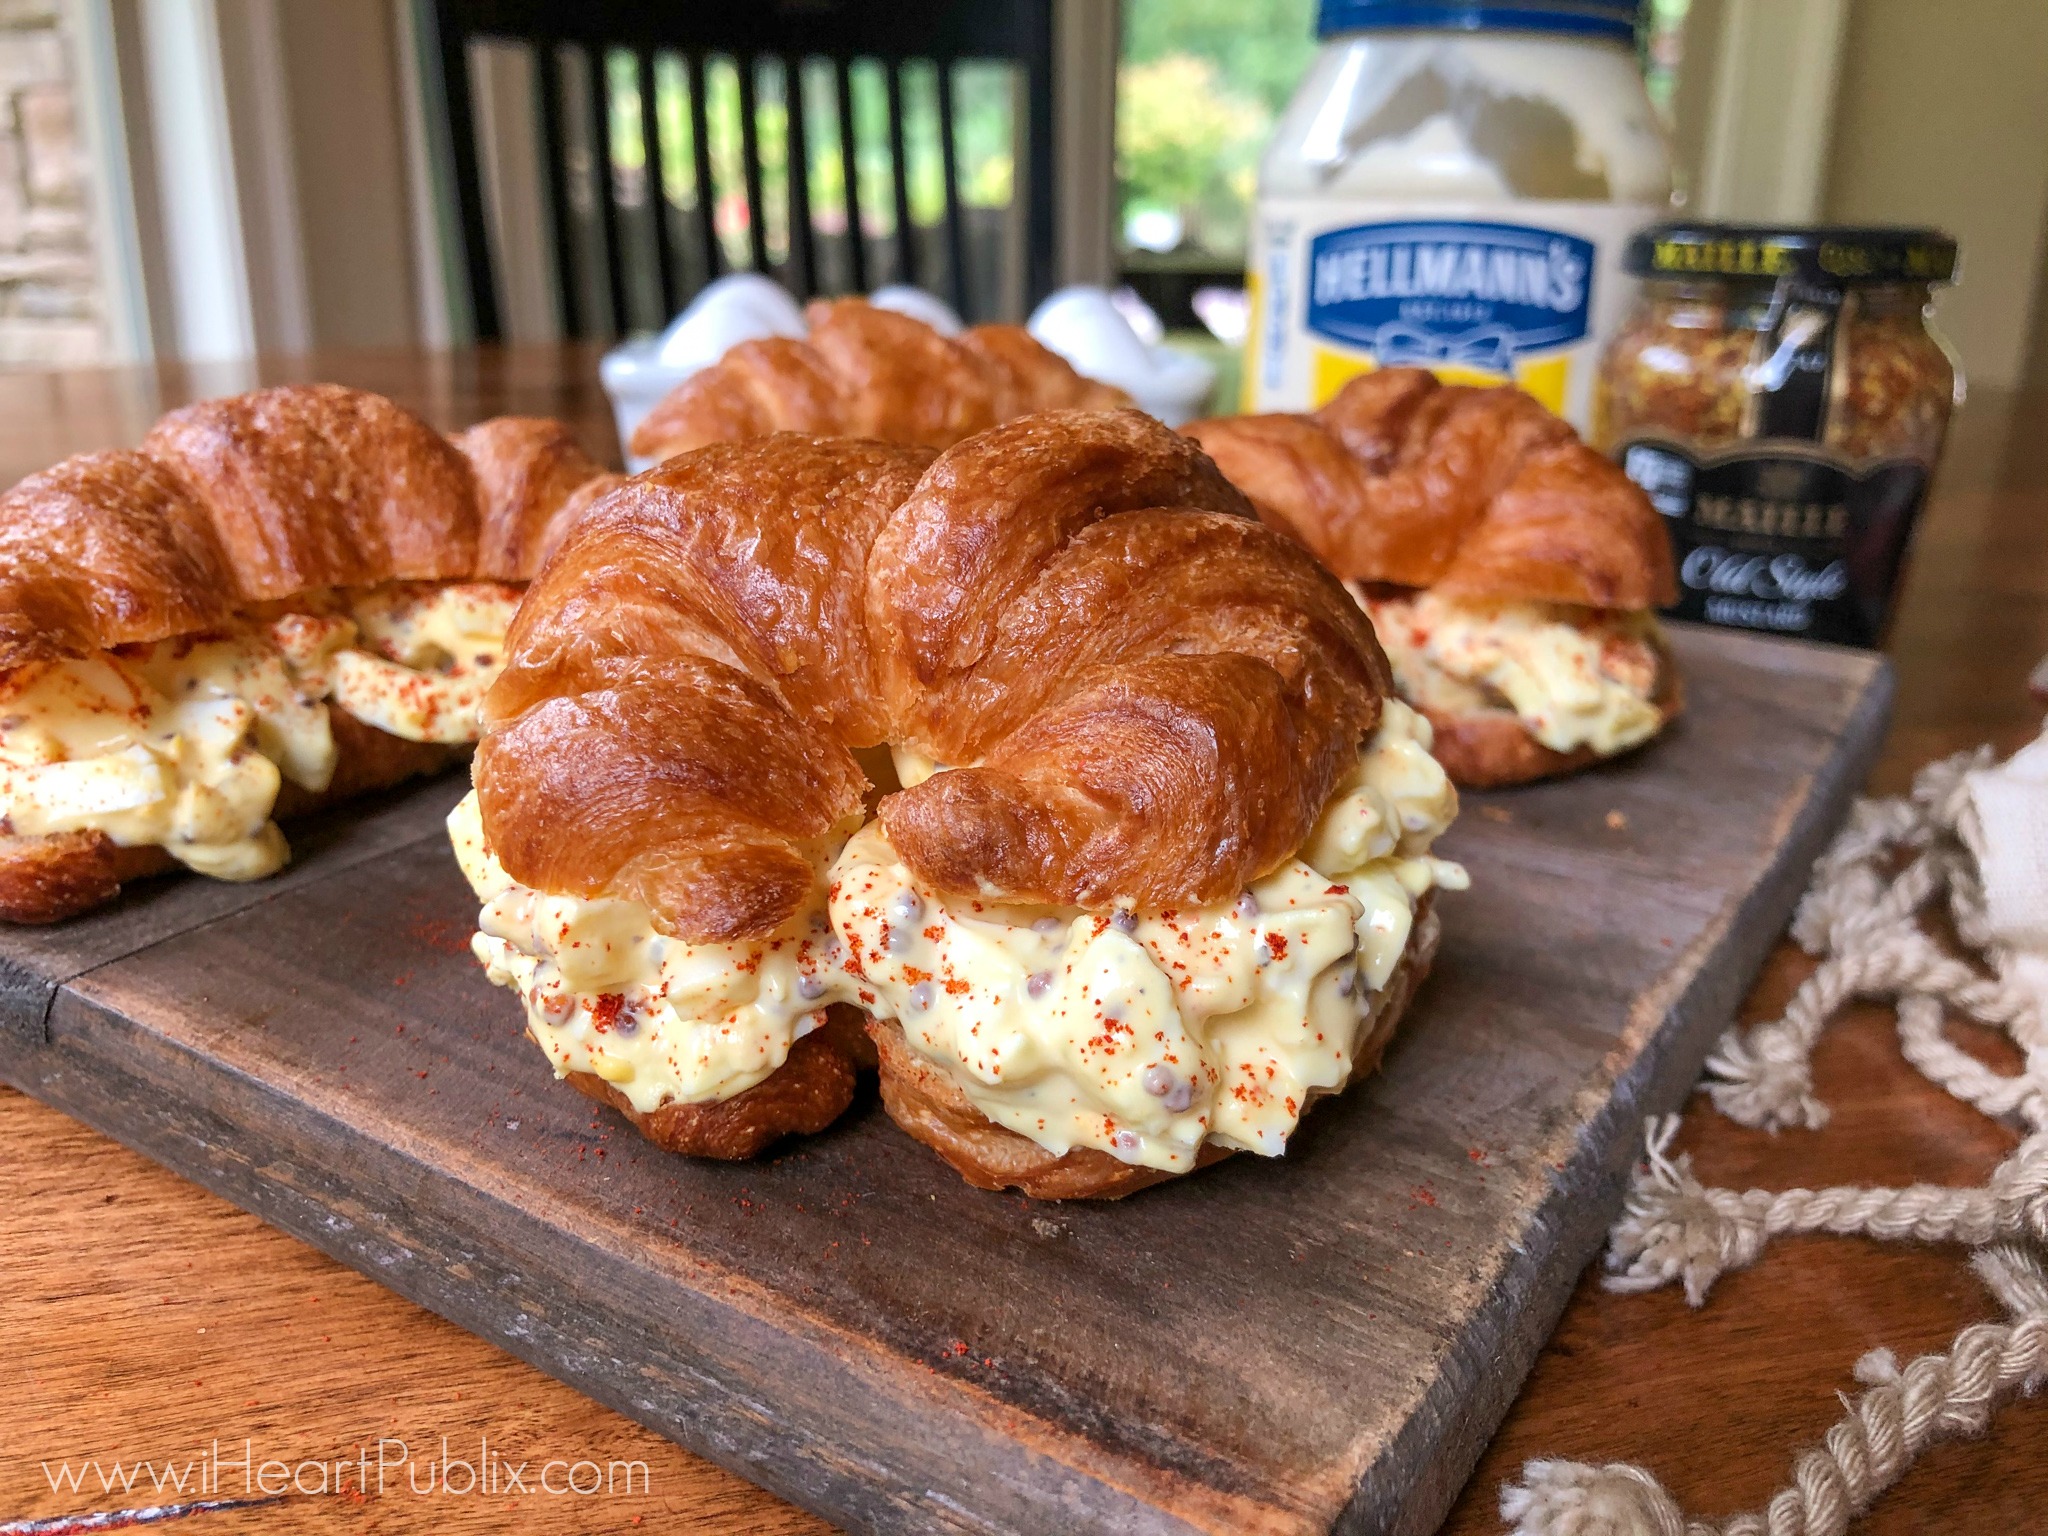 Southern Egg Salad Recipe - Get Everything You Need For A Tasty Meal At Publix on I Heart Publix